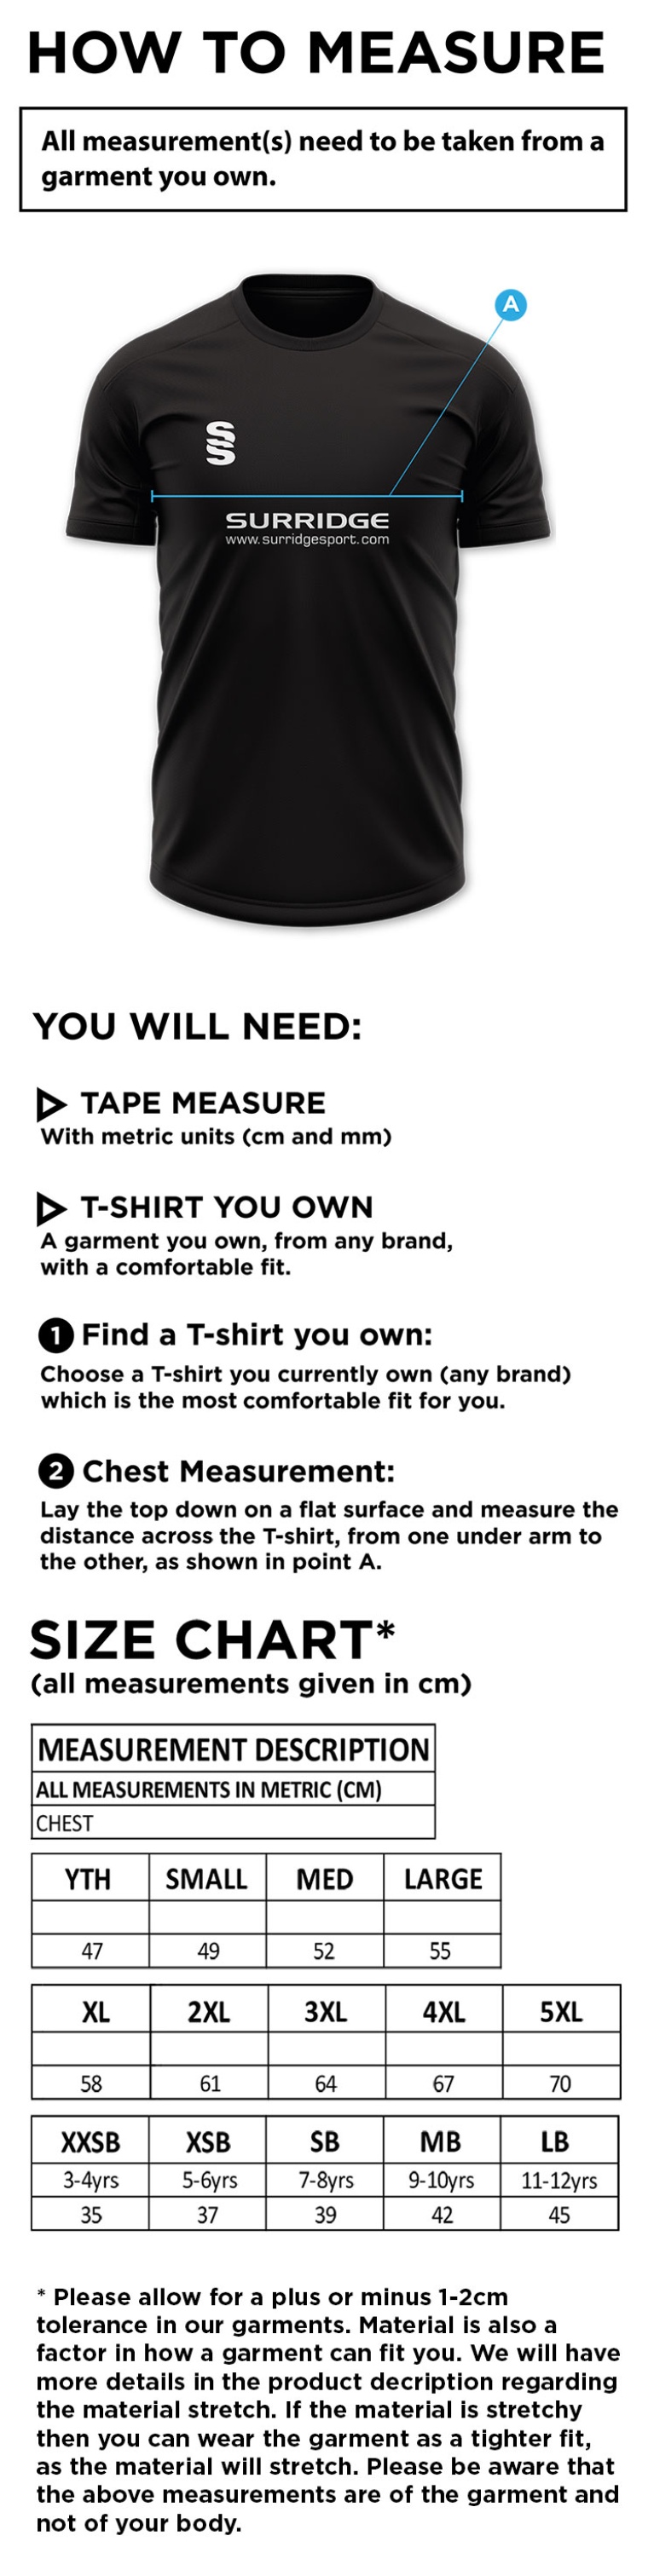 Youth's Dual Games Shirt : White - Size Guide